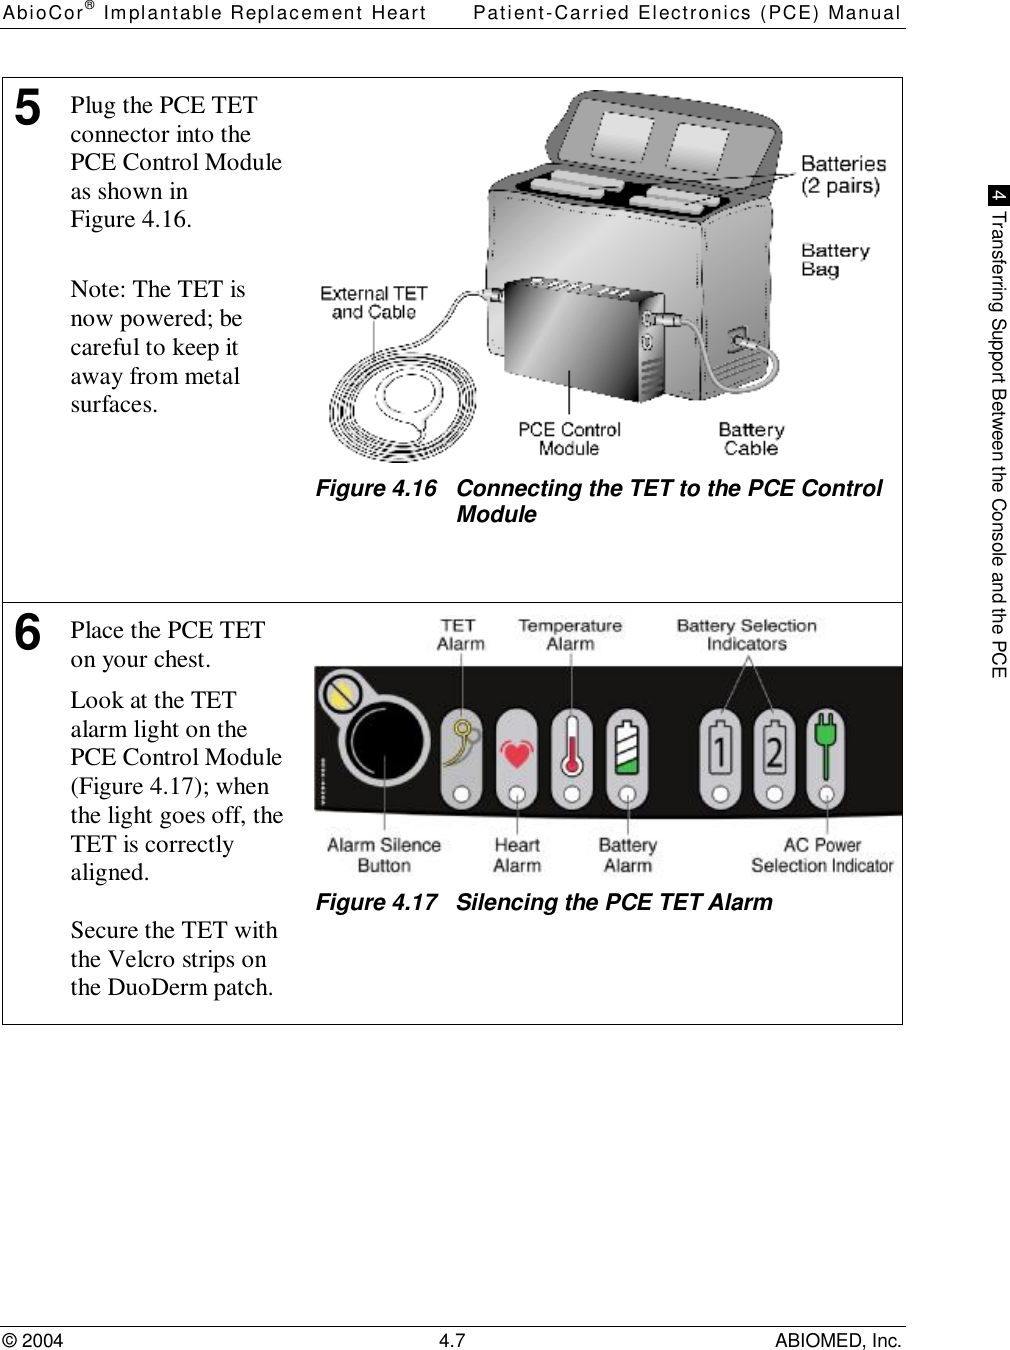 AbioCor® Implantable Replacement Heart Patient-Carried Electronics (PCE) Manual© 2004 4.7 ABIOMED, Inc. 4  Transferring Support Between the Console and the PCE5Plug the PCE TETconnector into thePCE Control Moduleas shown inFigure 4.16.Note: The TET isnow powered; becareful to keep itaway from metalsurfaces.Figure 4.16   Connecting the TET to the PCE ControlModule6Place the PCE TETon your chest.Look at the TETalarm light on thePCE Control Module(Figure 4.17); whenthe light goes off, theTET is correctlyaligned.Secure the TET withthe Velcro strips onthe DuoDerm patch.Figure 4.17   Silencing the PCE TET Alarm